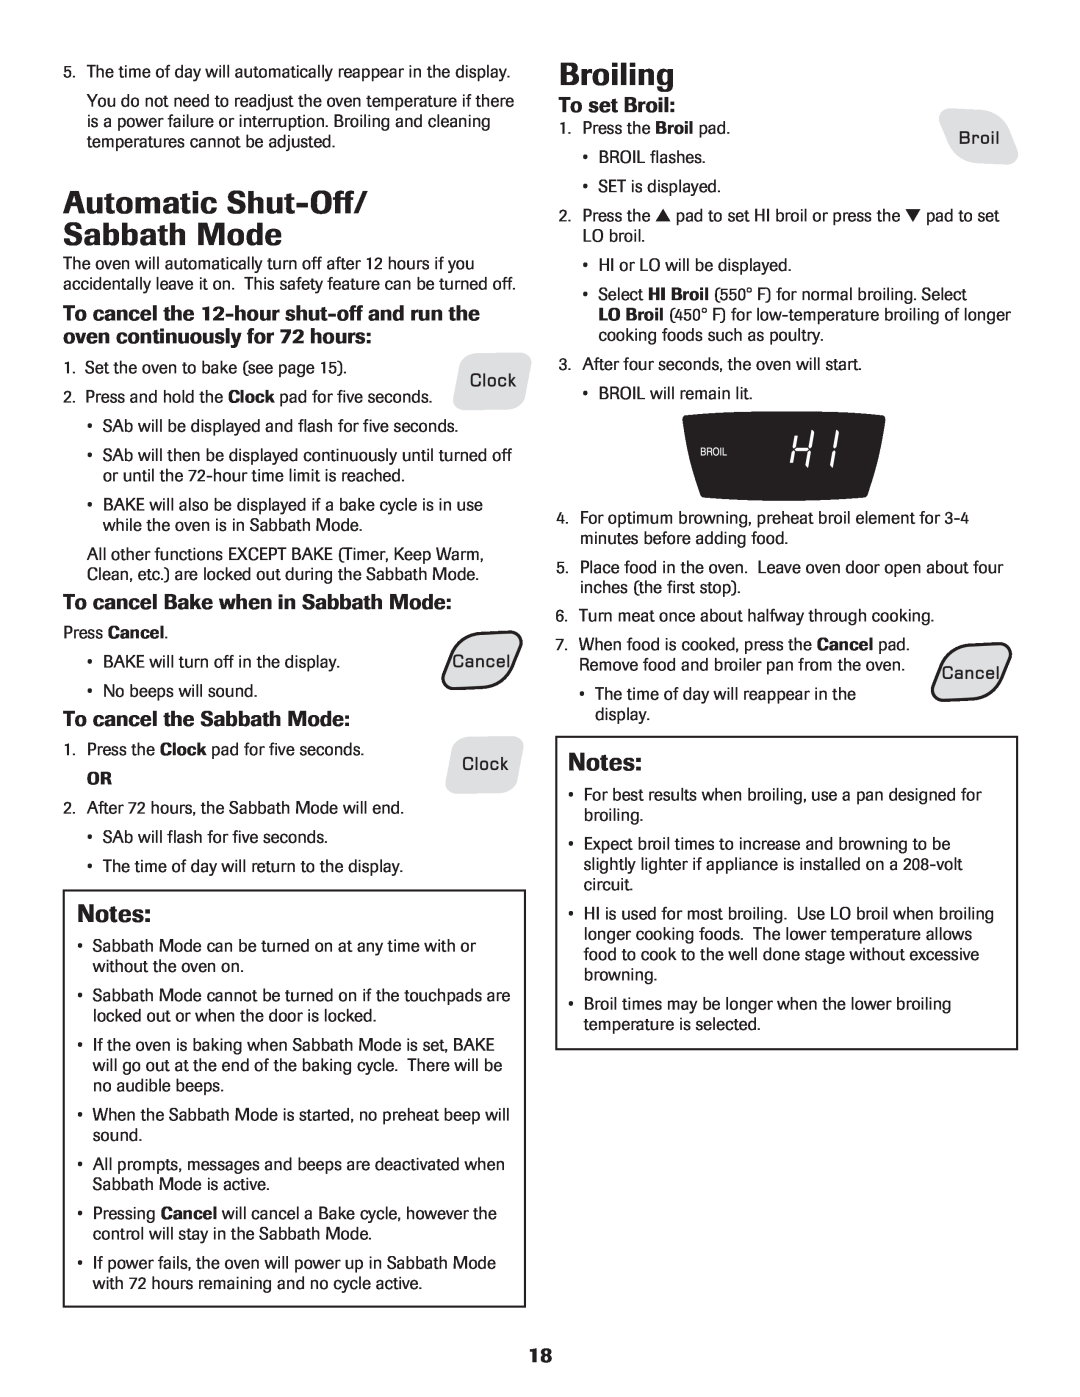 Amana Electric Range - Coil Automatic Shut-Off Sabbath Mode, Broiling, To cancel Bake when in Sabbath Mode, To set Broil 